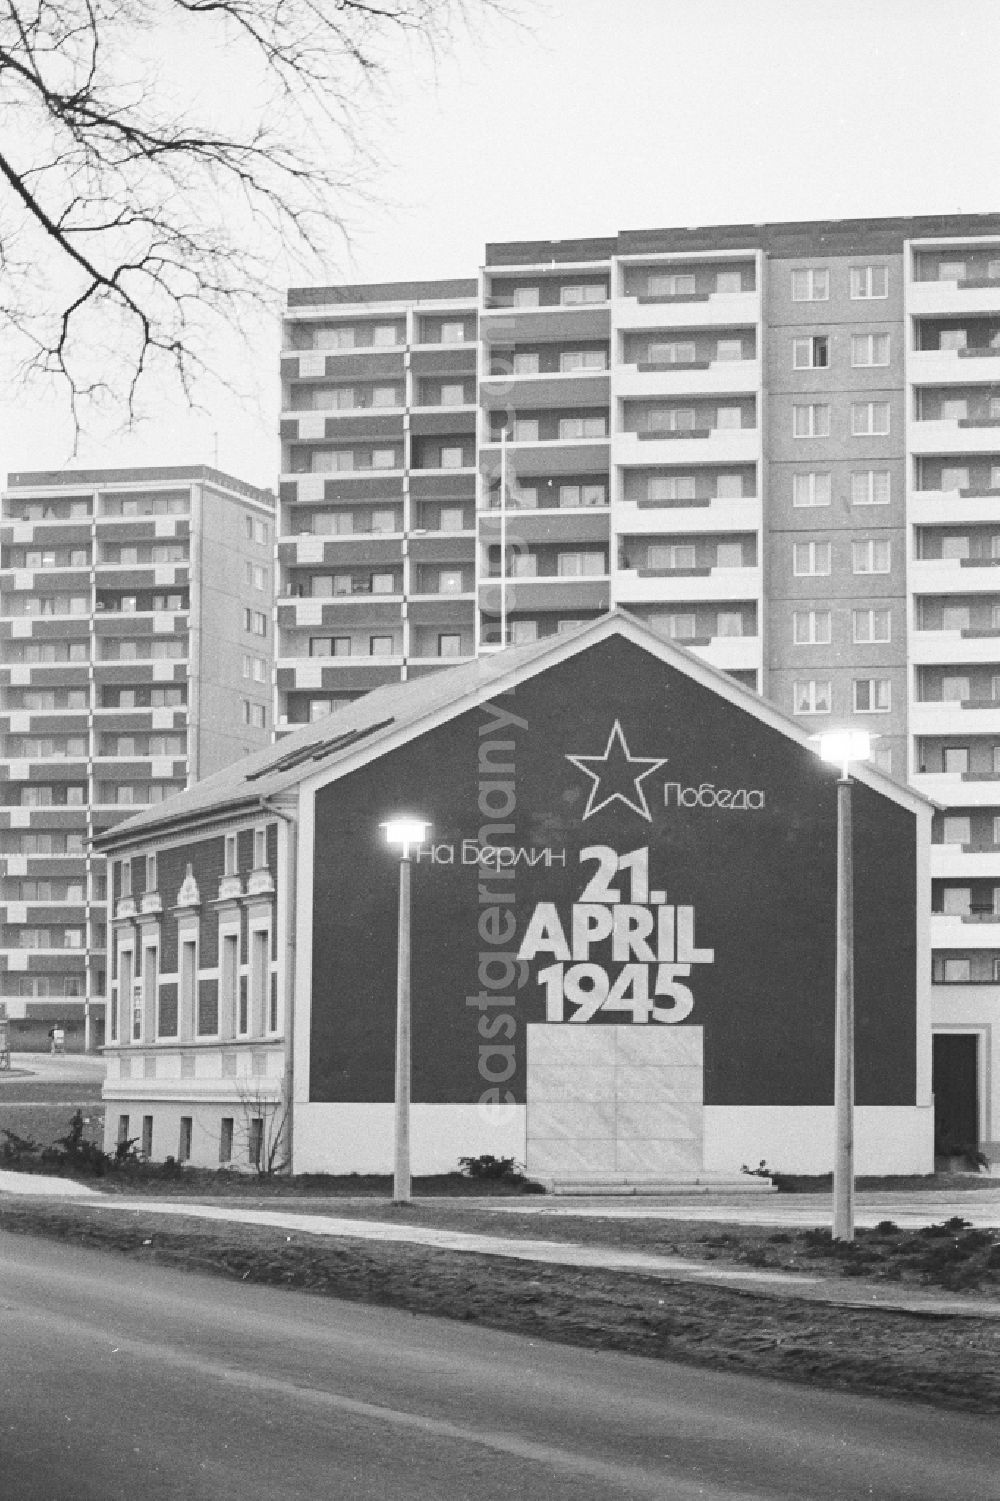 Berlin: Opening of the history cabinet of today's House of Liberation in Leninallee, today's Landsberger Allee 563 in the district Marzahn in Berlin, the former capital of the GDR, German Democratic Republic. On the gable wall there is a white letter April 21, 1945 above it and a star in Cyrillic letters the words Probjeda (Sieg) and Na Berlin (Nach Berlin)